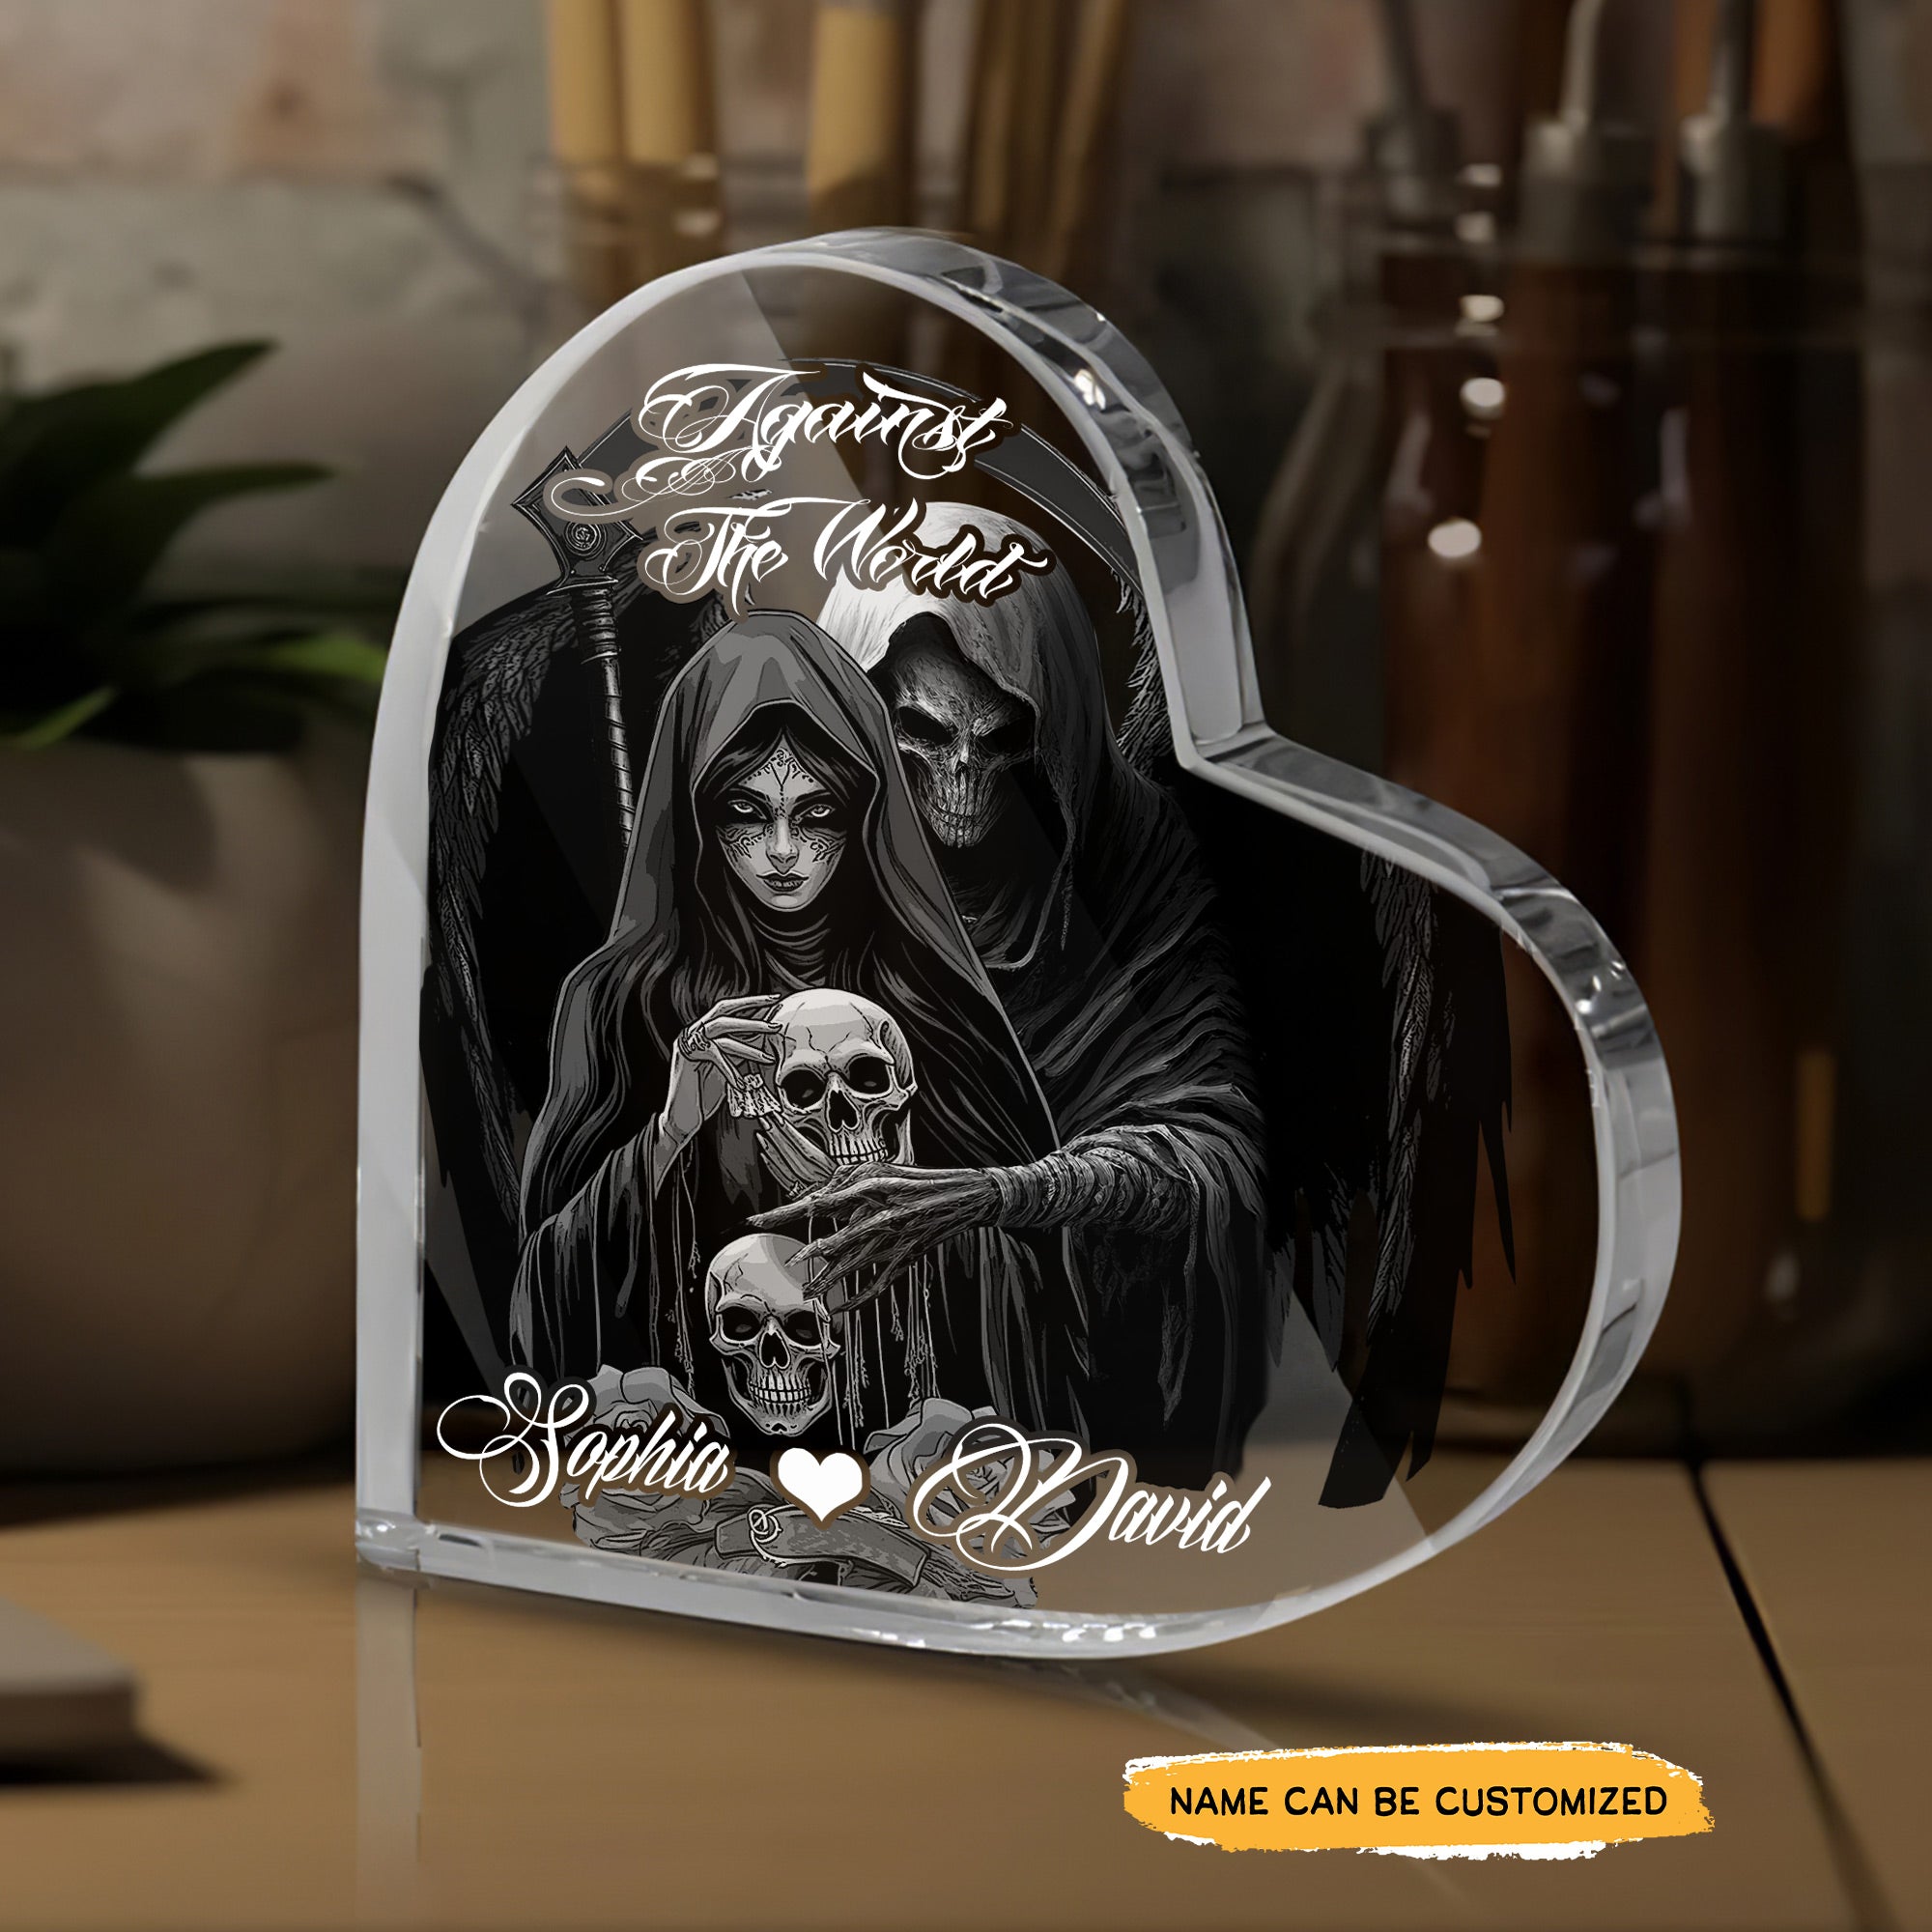 Against Still End - Customized Skull Couple Crystal Heart Anniversary Gifts